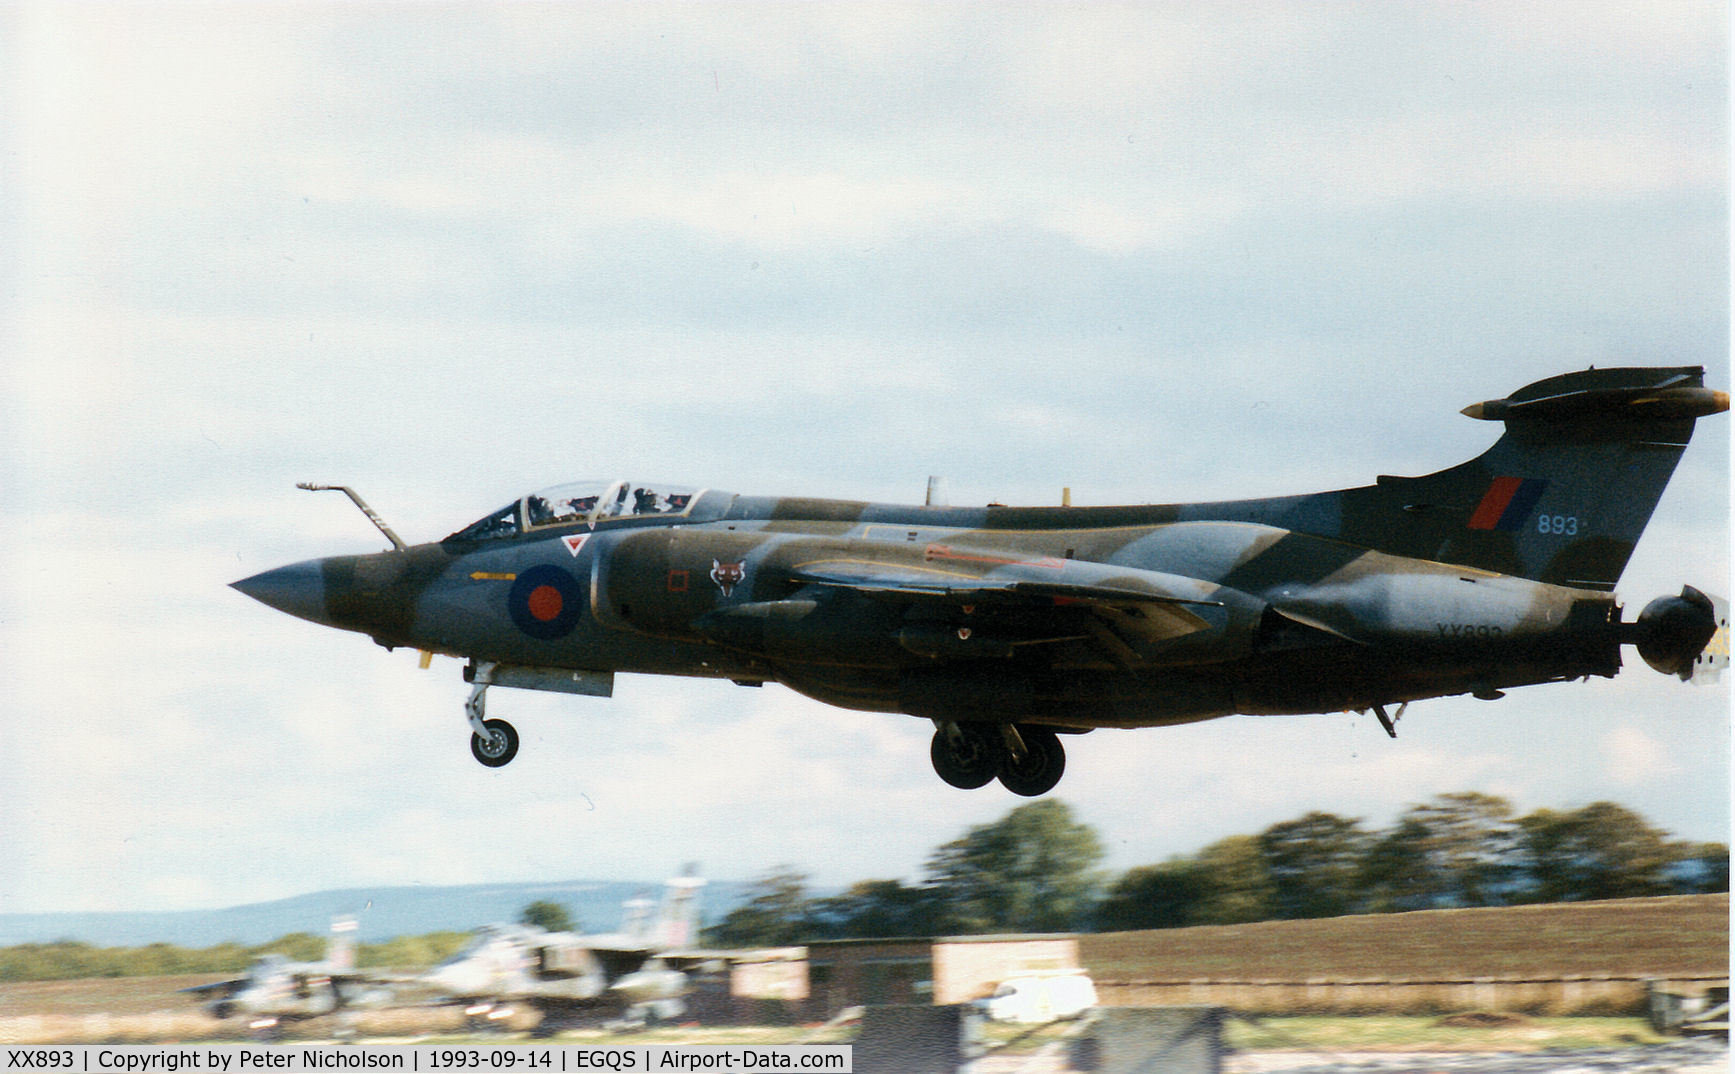 XX893, 1975 Hawker Siddeley Buccaneer S.2B C/N B3-02-74, Buccaneer S.2B of 12 Squadron crossing the threshold of Runway 05 at RAF Lossiemouth in September 1993.